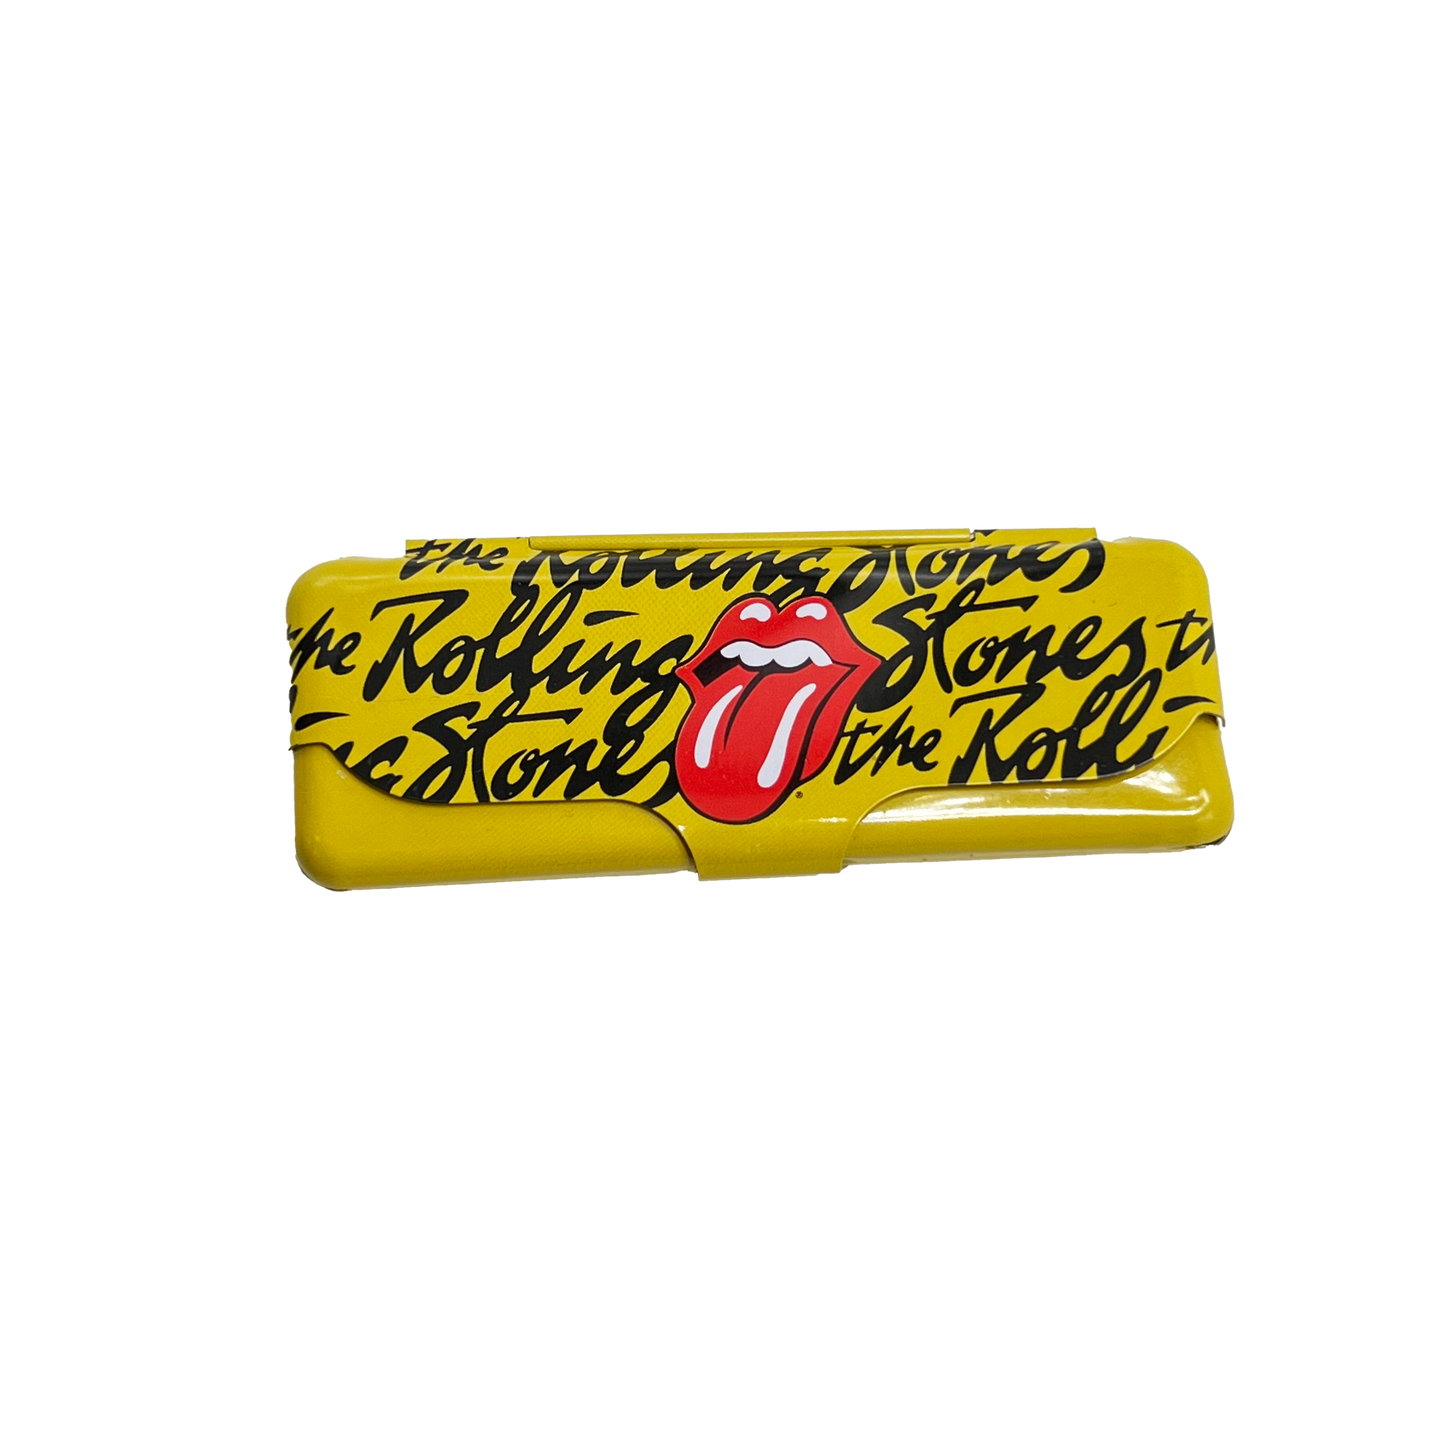 COVER PAPERS 1.1/4 ROLLING STONES